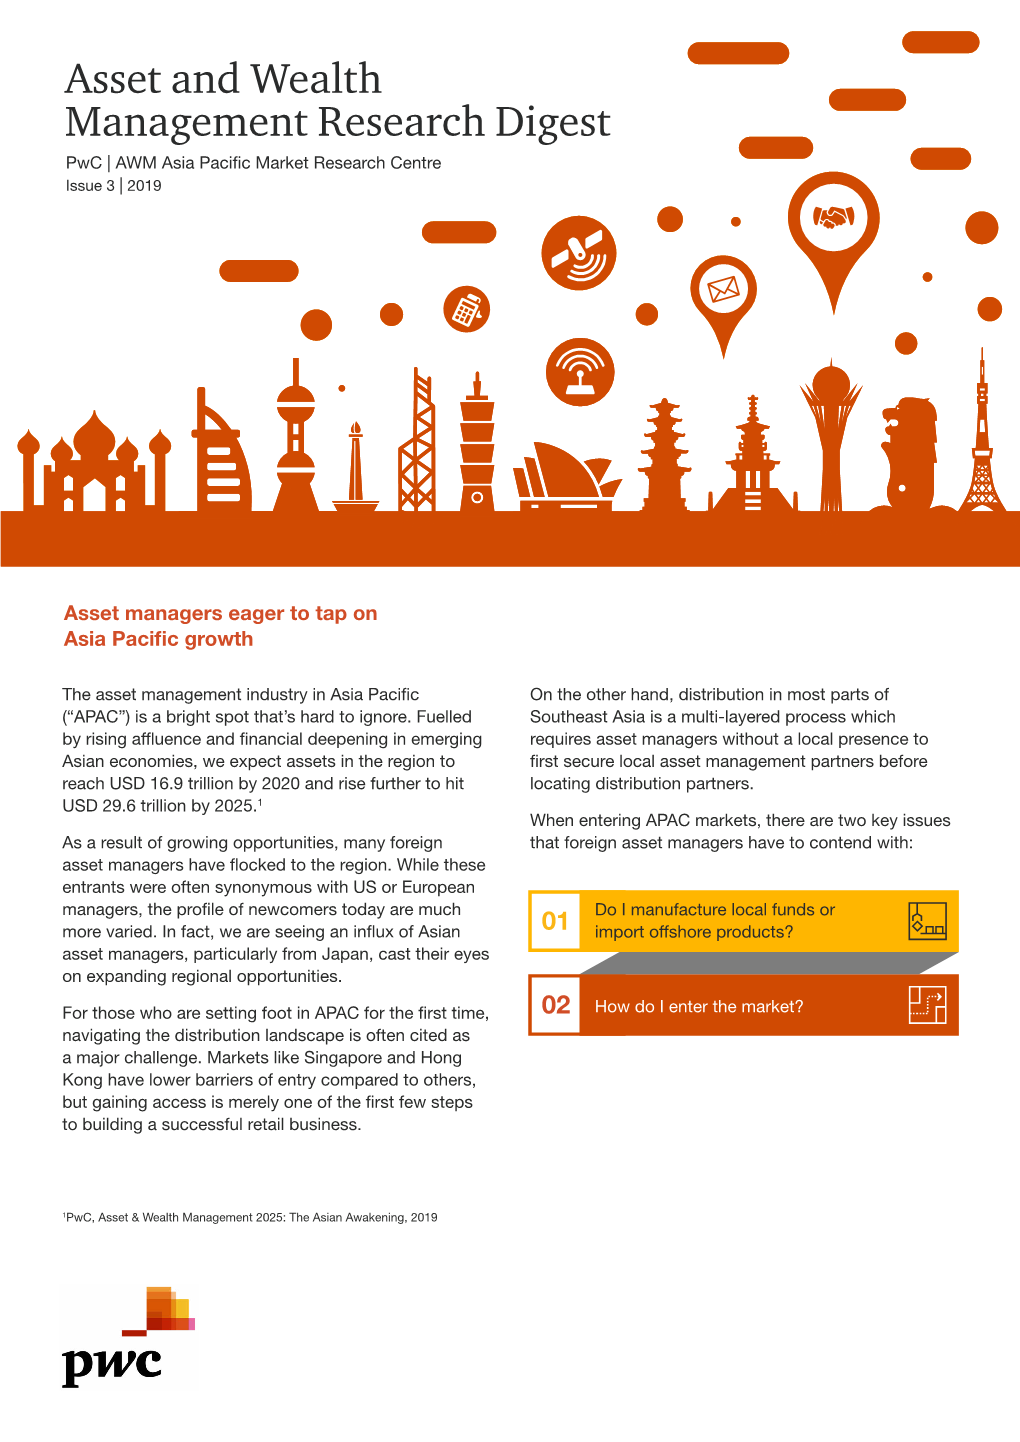 Asset and Wealth Management Research Digest Pwc | AWM Asia Pacific Market Research Centre Issue 3 | 2019